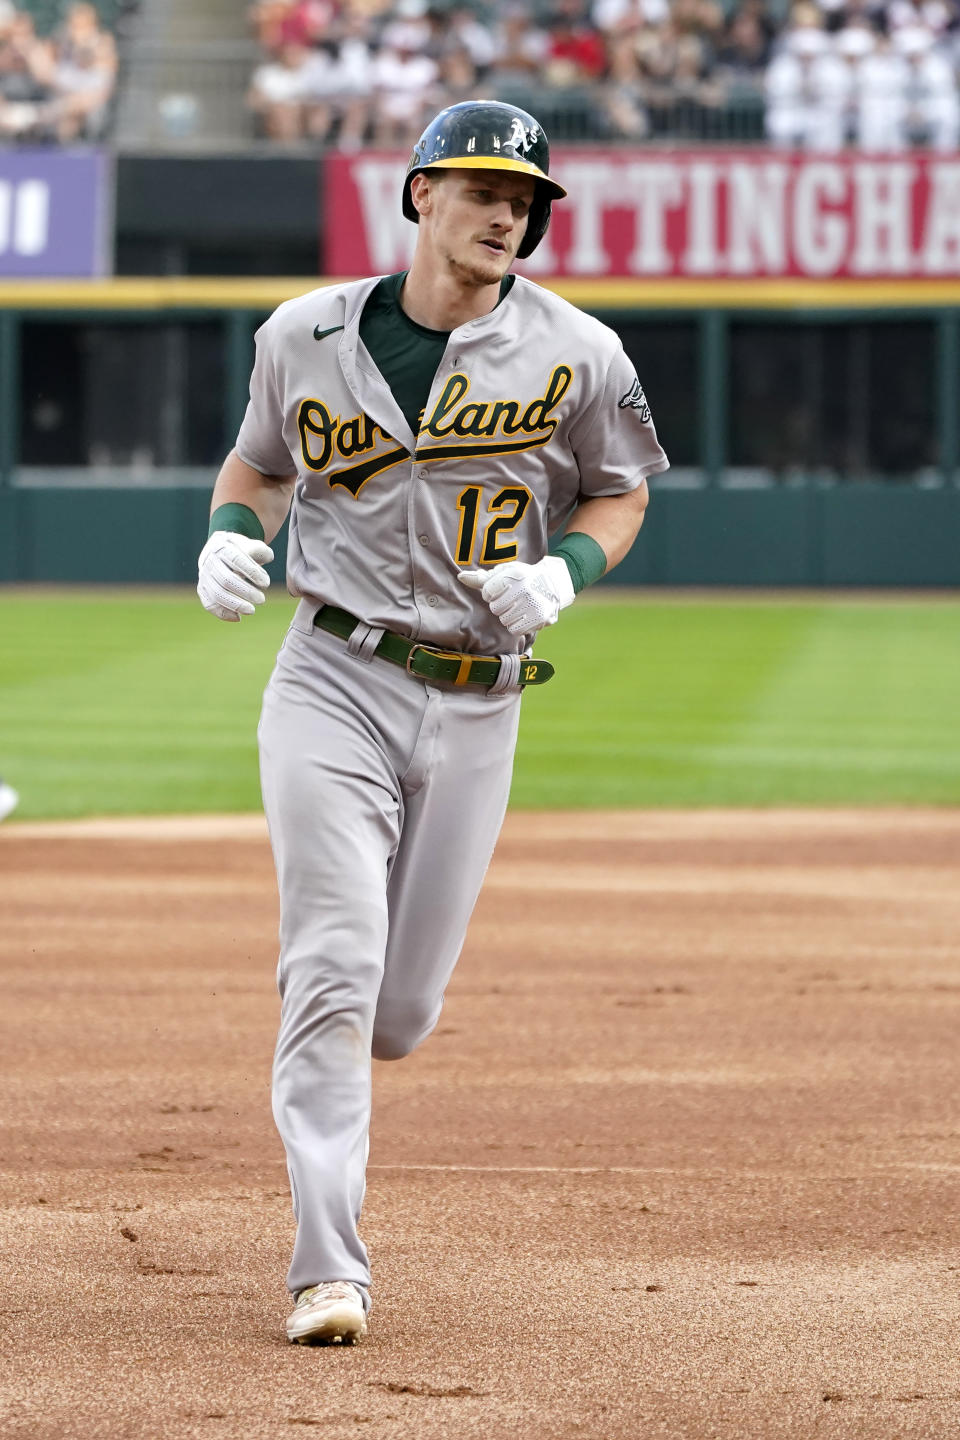 Oakland Athletics' Sean Murphy rounds the bases after his home run off Chicago White Sox starting pitcher Johnny Cueto during the first inning of a baseball game Saturday, July 30, 2022, in Chicago. (AP Photo/Charles Rex Arbogast)